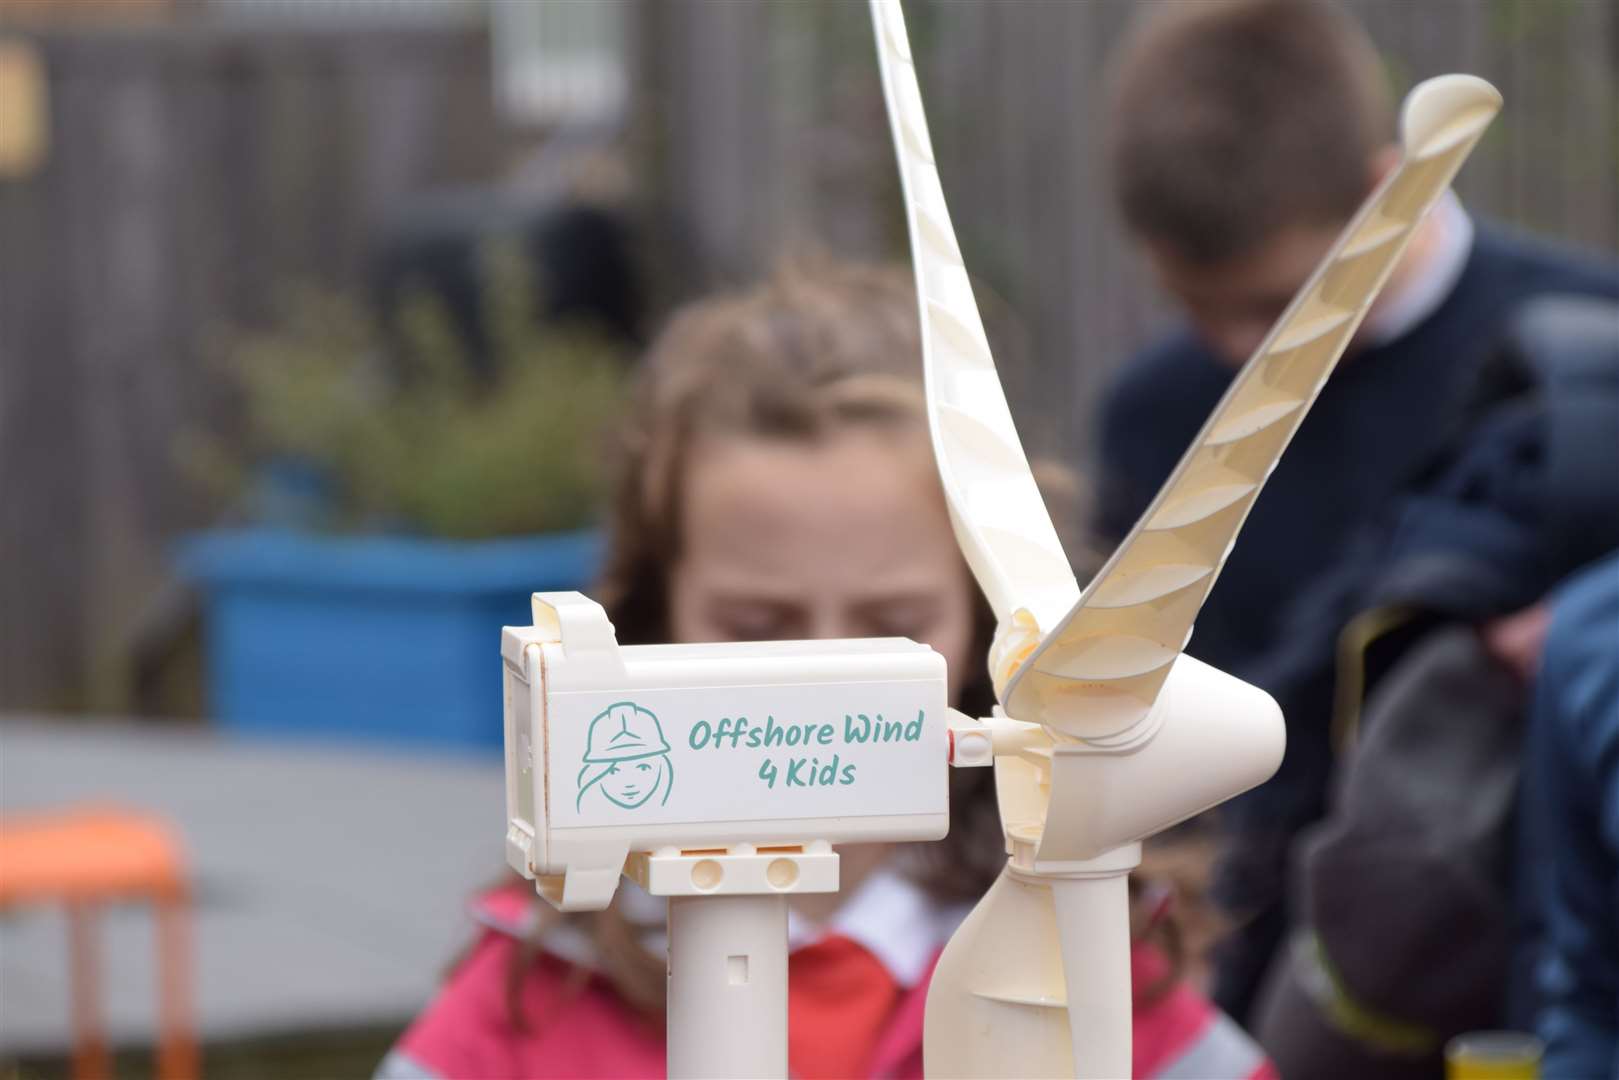 Youngsters will take part in the Offshore Wind 4 Kids sessions at Aberdeen Science Centre.